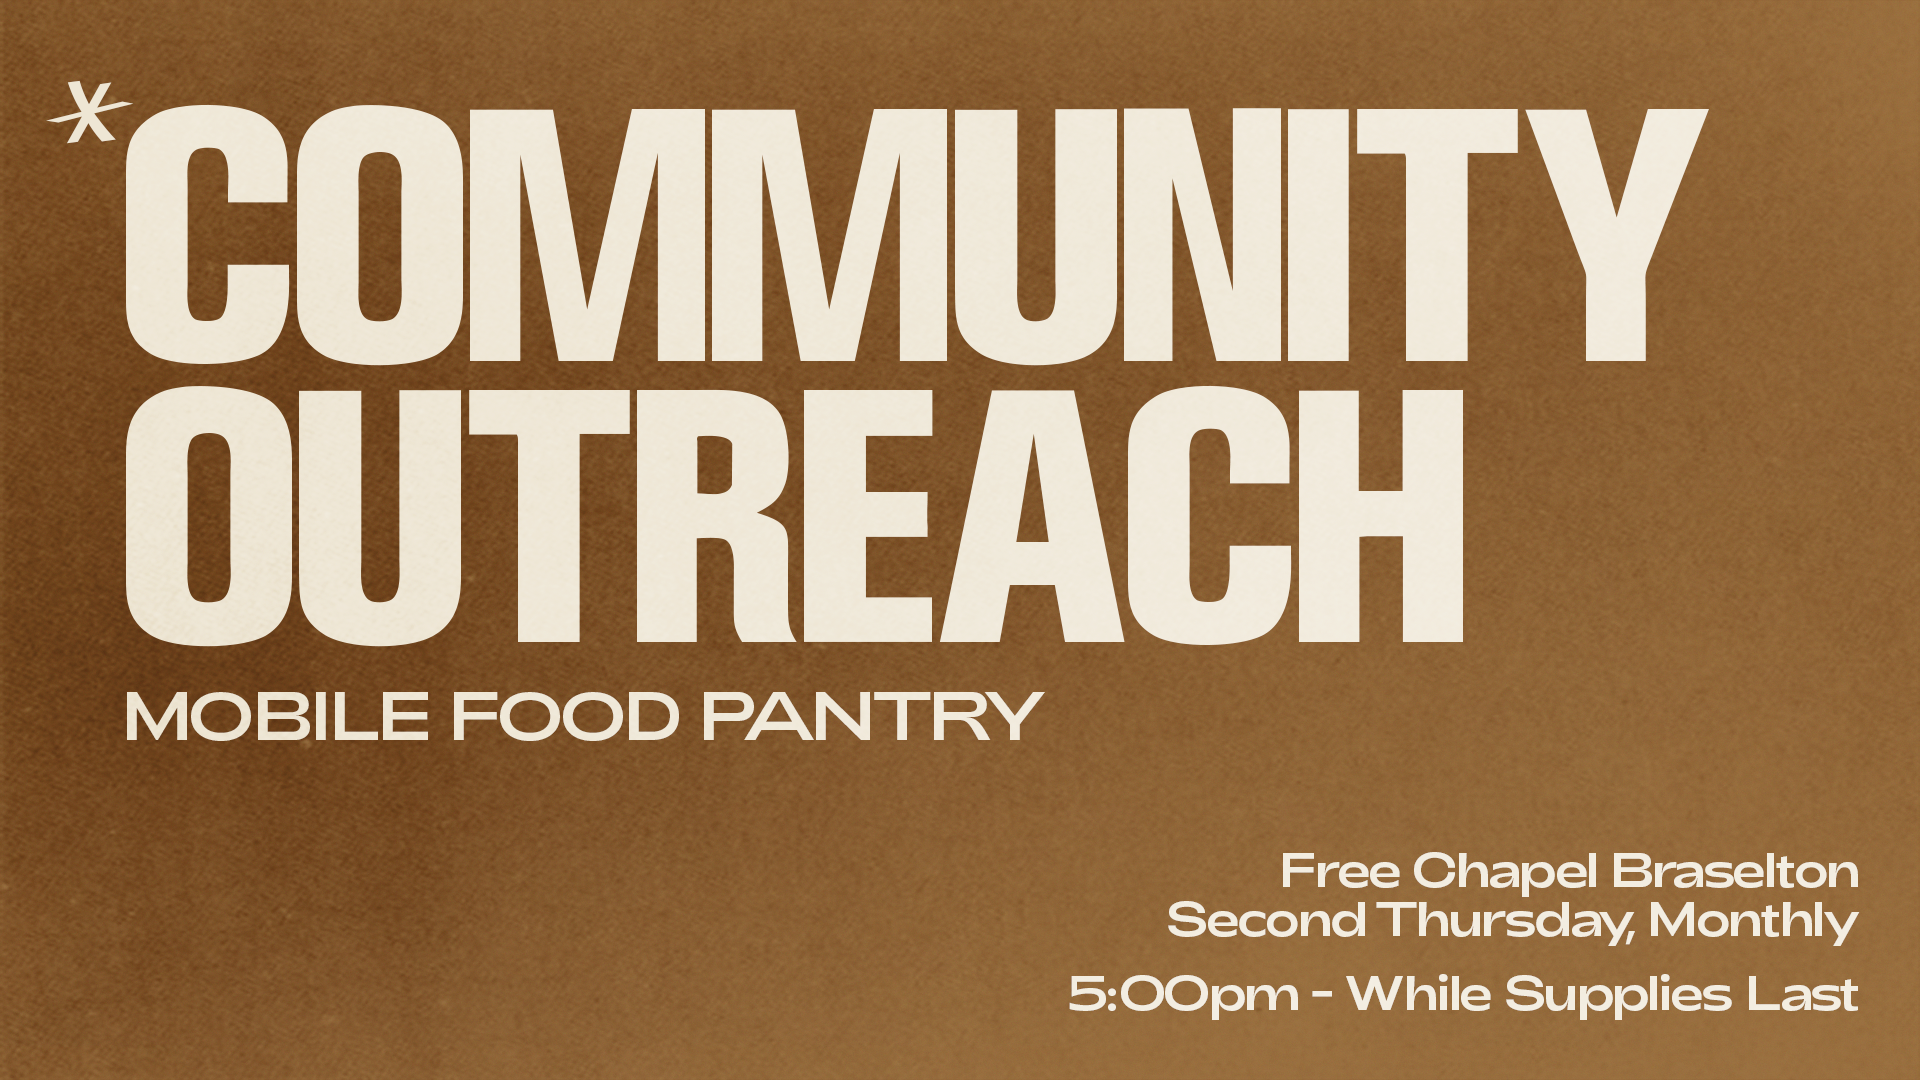 Community Outreach: Mobile Food Pantry at the Braselton campus